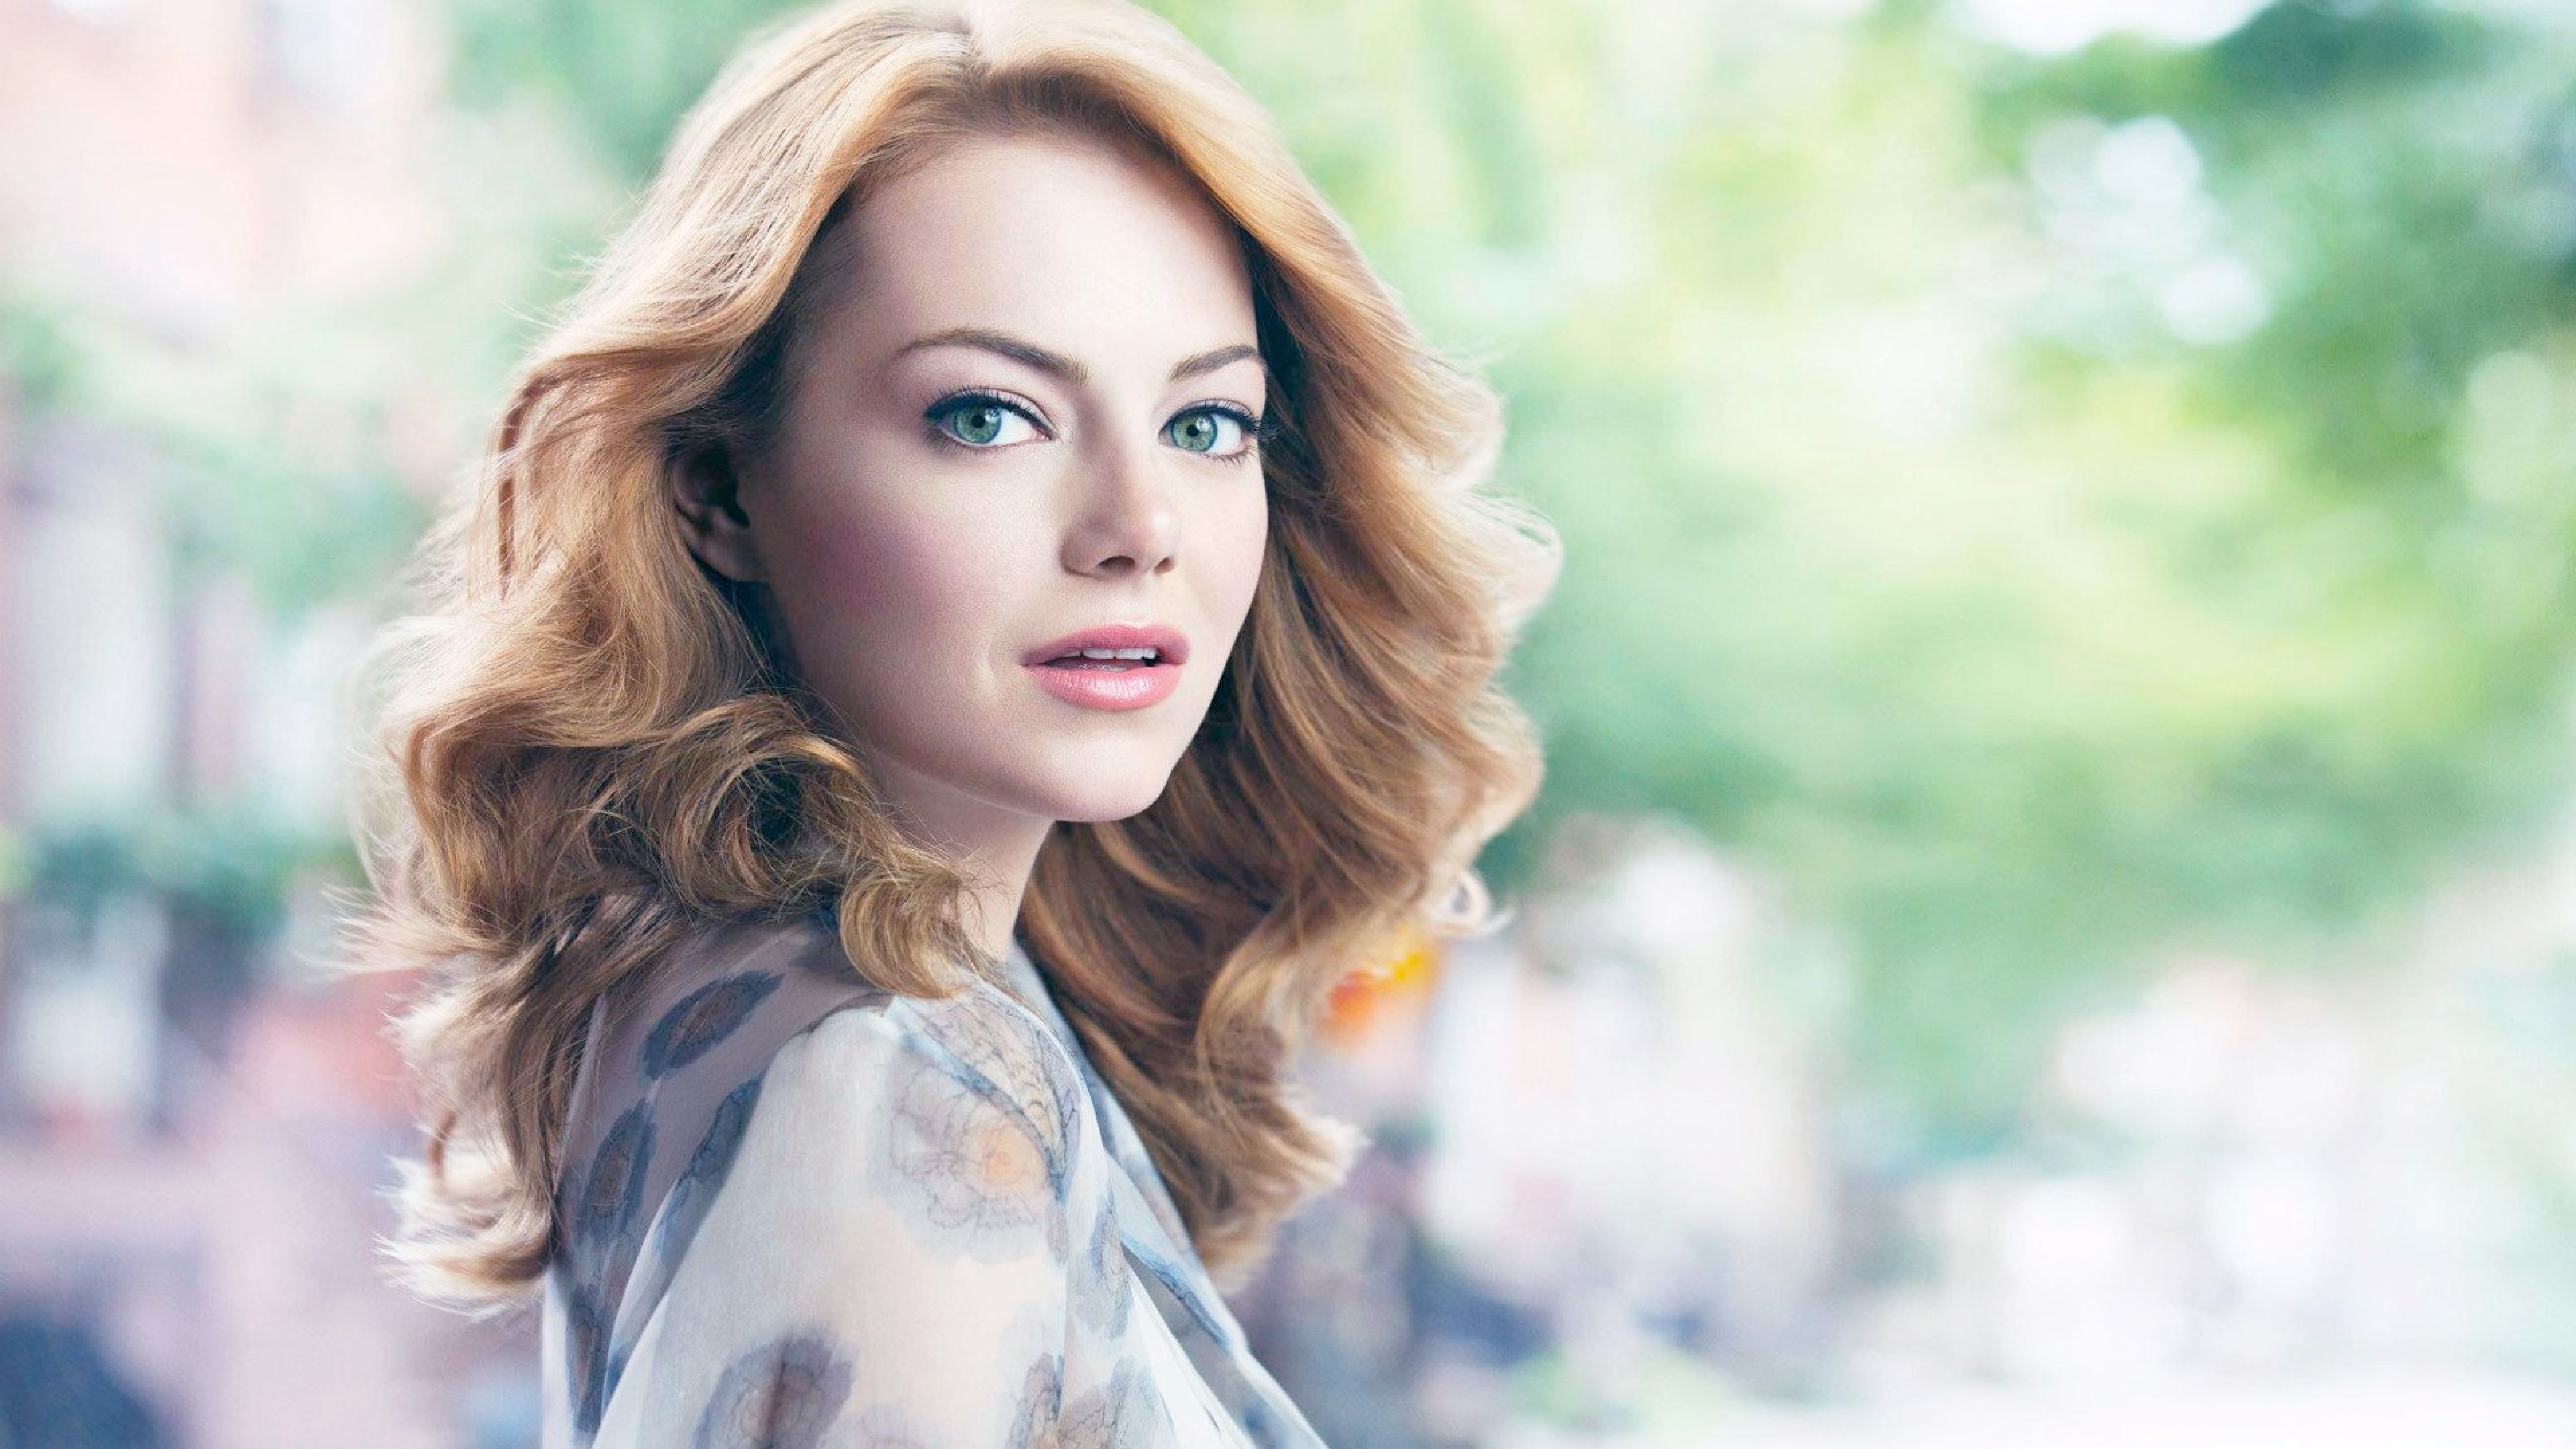 7680x4320 Emma Stone Hd Pics 8K Wallpaper, HD Celebrities 4K Wallpapers,  Images, Photos and Background - Wallpapers Den